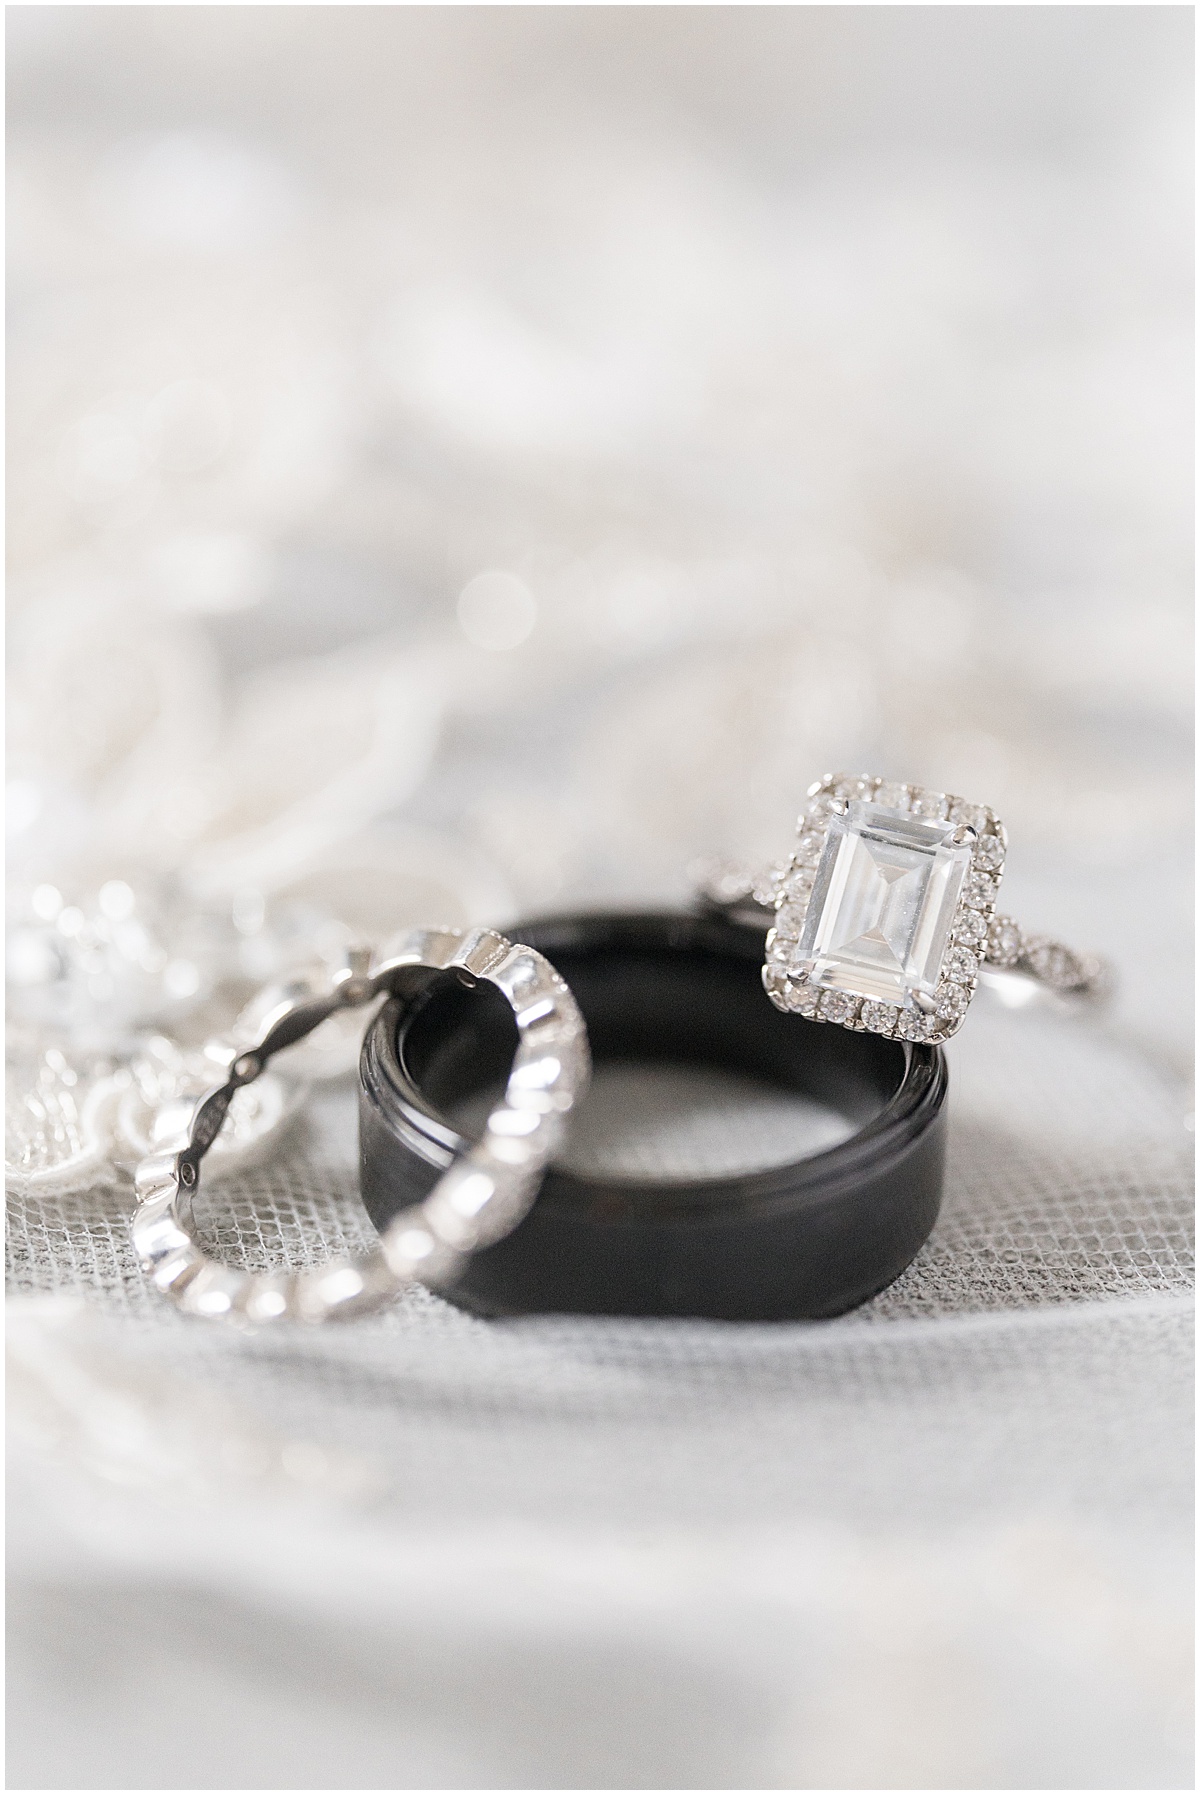 Close up of rings at wedding at Finkbiner Gala Barn in Veedersburg, Indiana photographed by Victoria Rayburn Photography